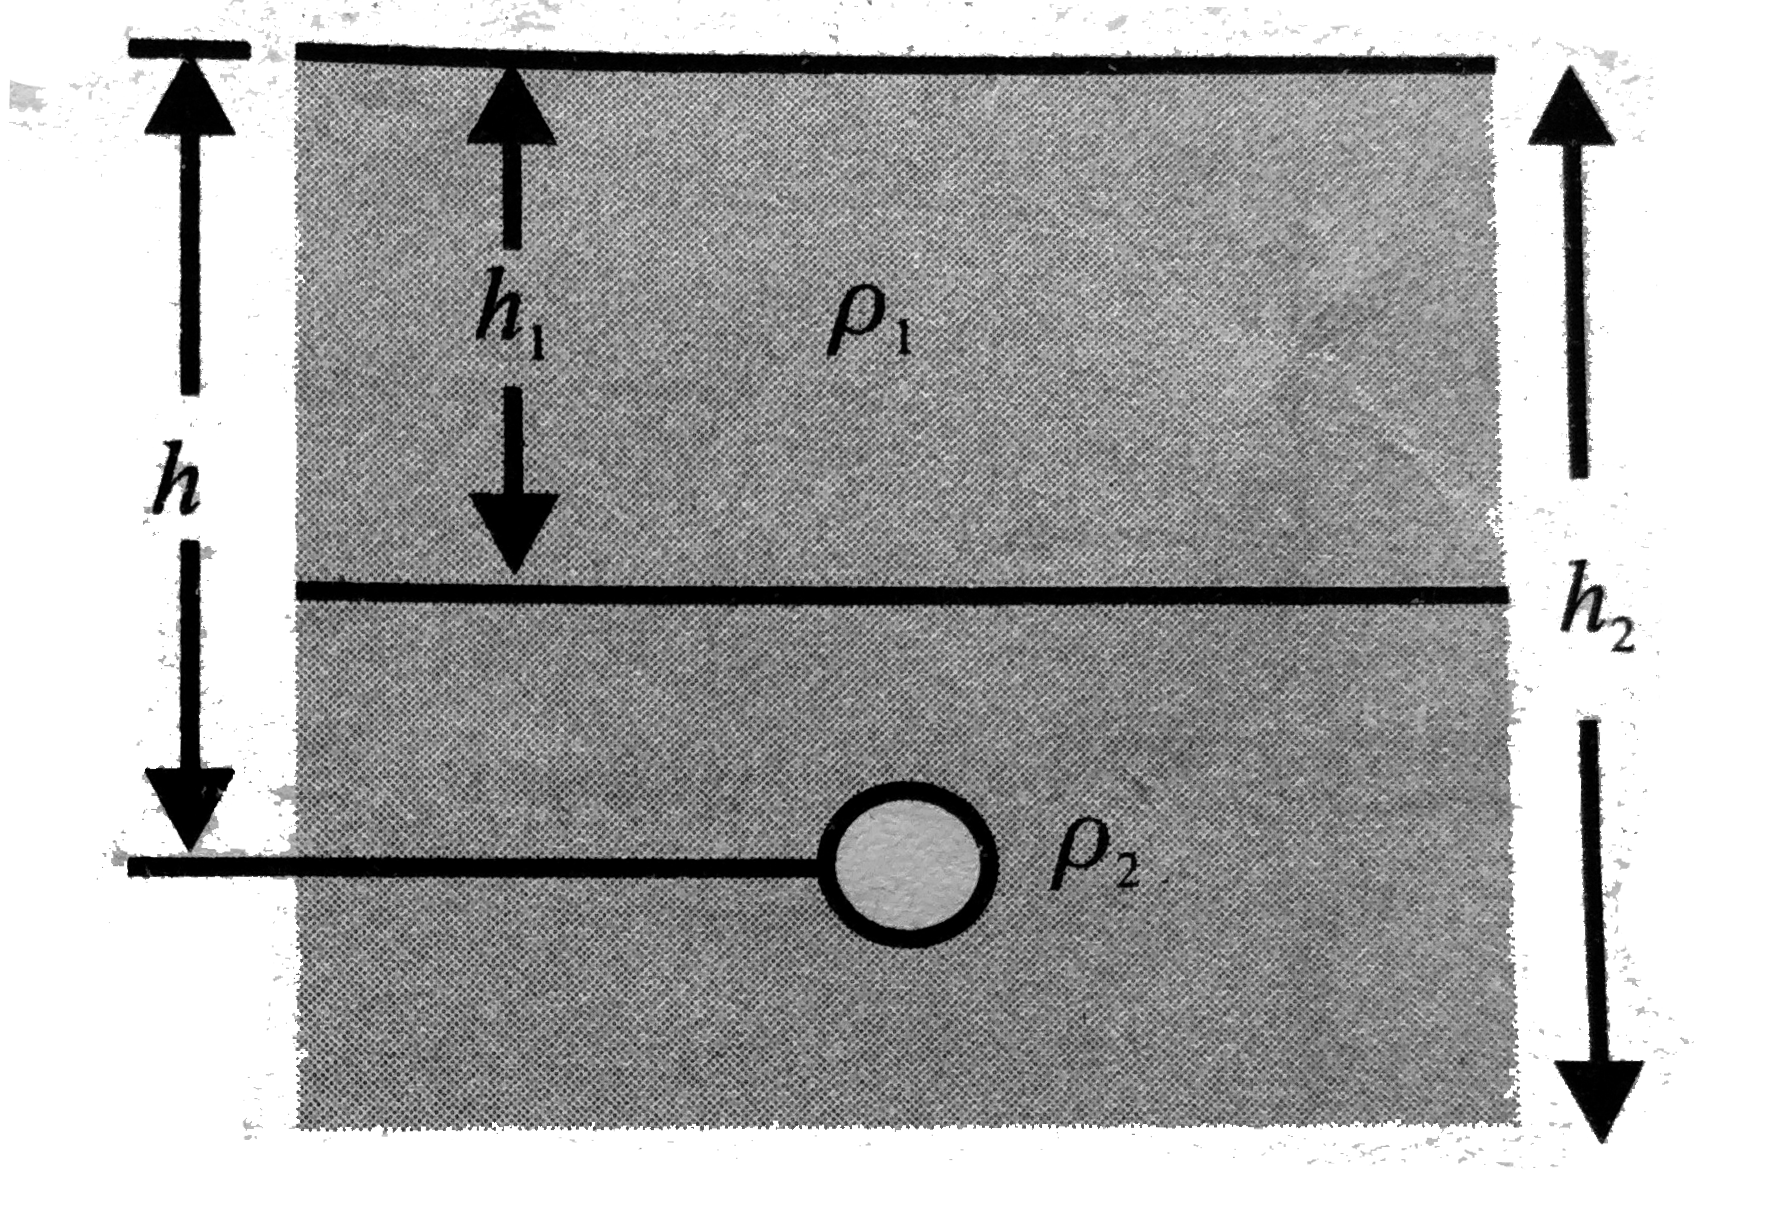 Calculate the pressure inside a small air bubble of radus r situated at a depth h below the free surface of liquids of densities rho(1) and rho(2) and surface tennsions T(1) and T(2). The thickness of the first and second liquids are h(1) and h(2) respectively. Take atmosphere pressure =P(0).